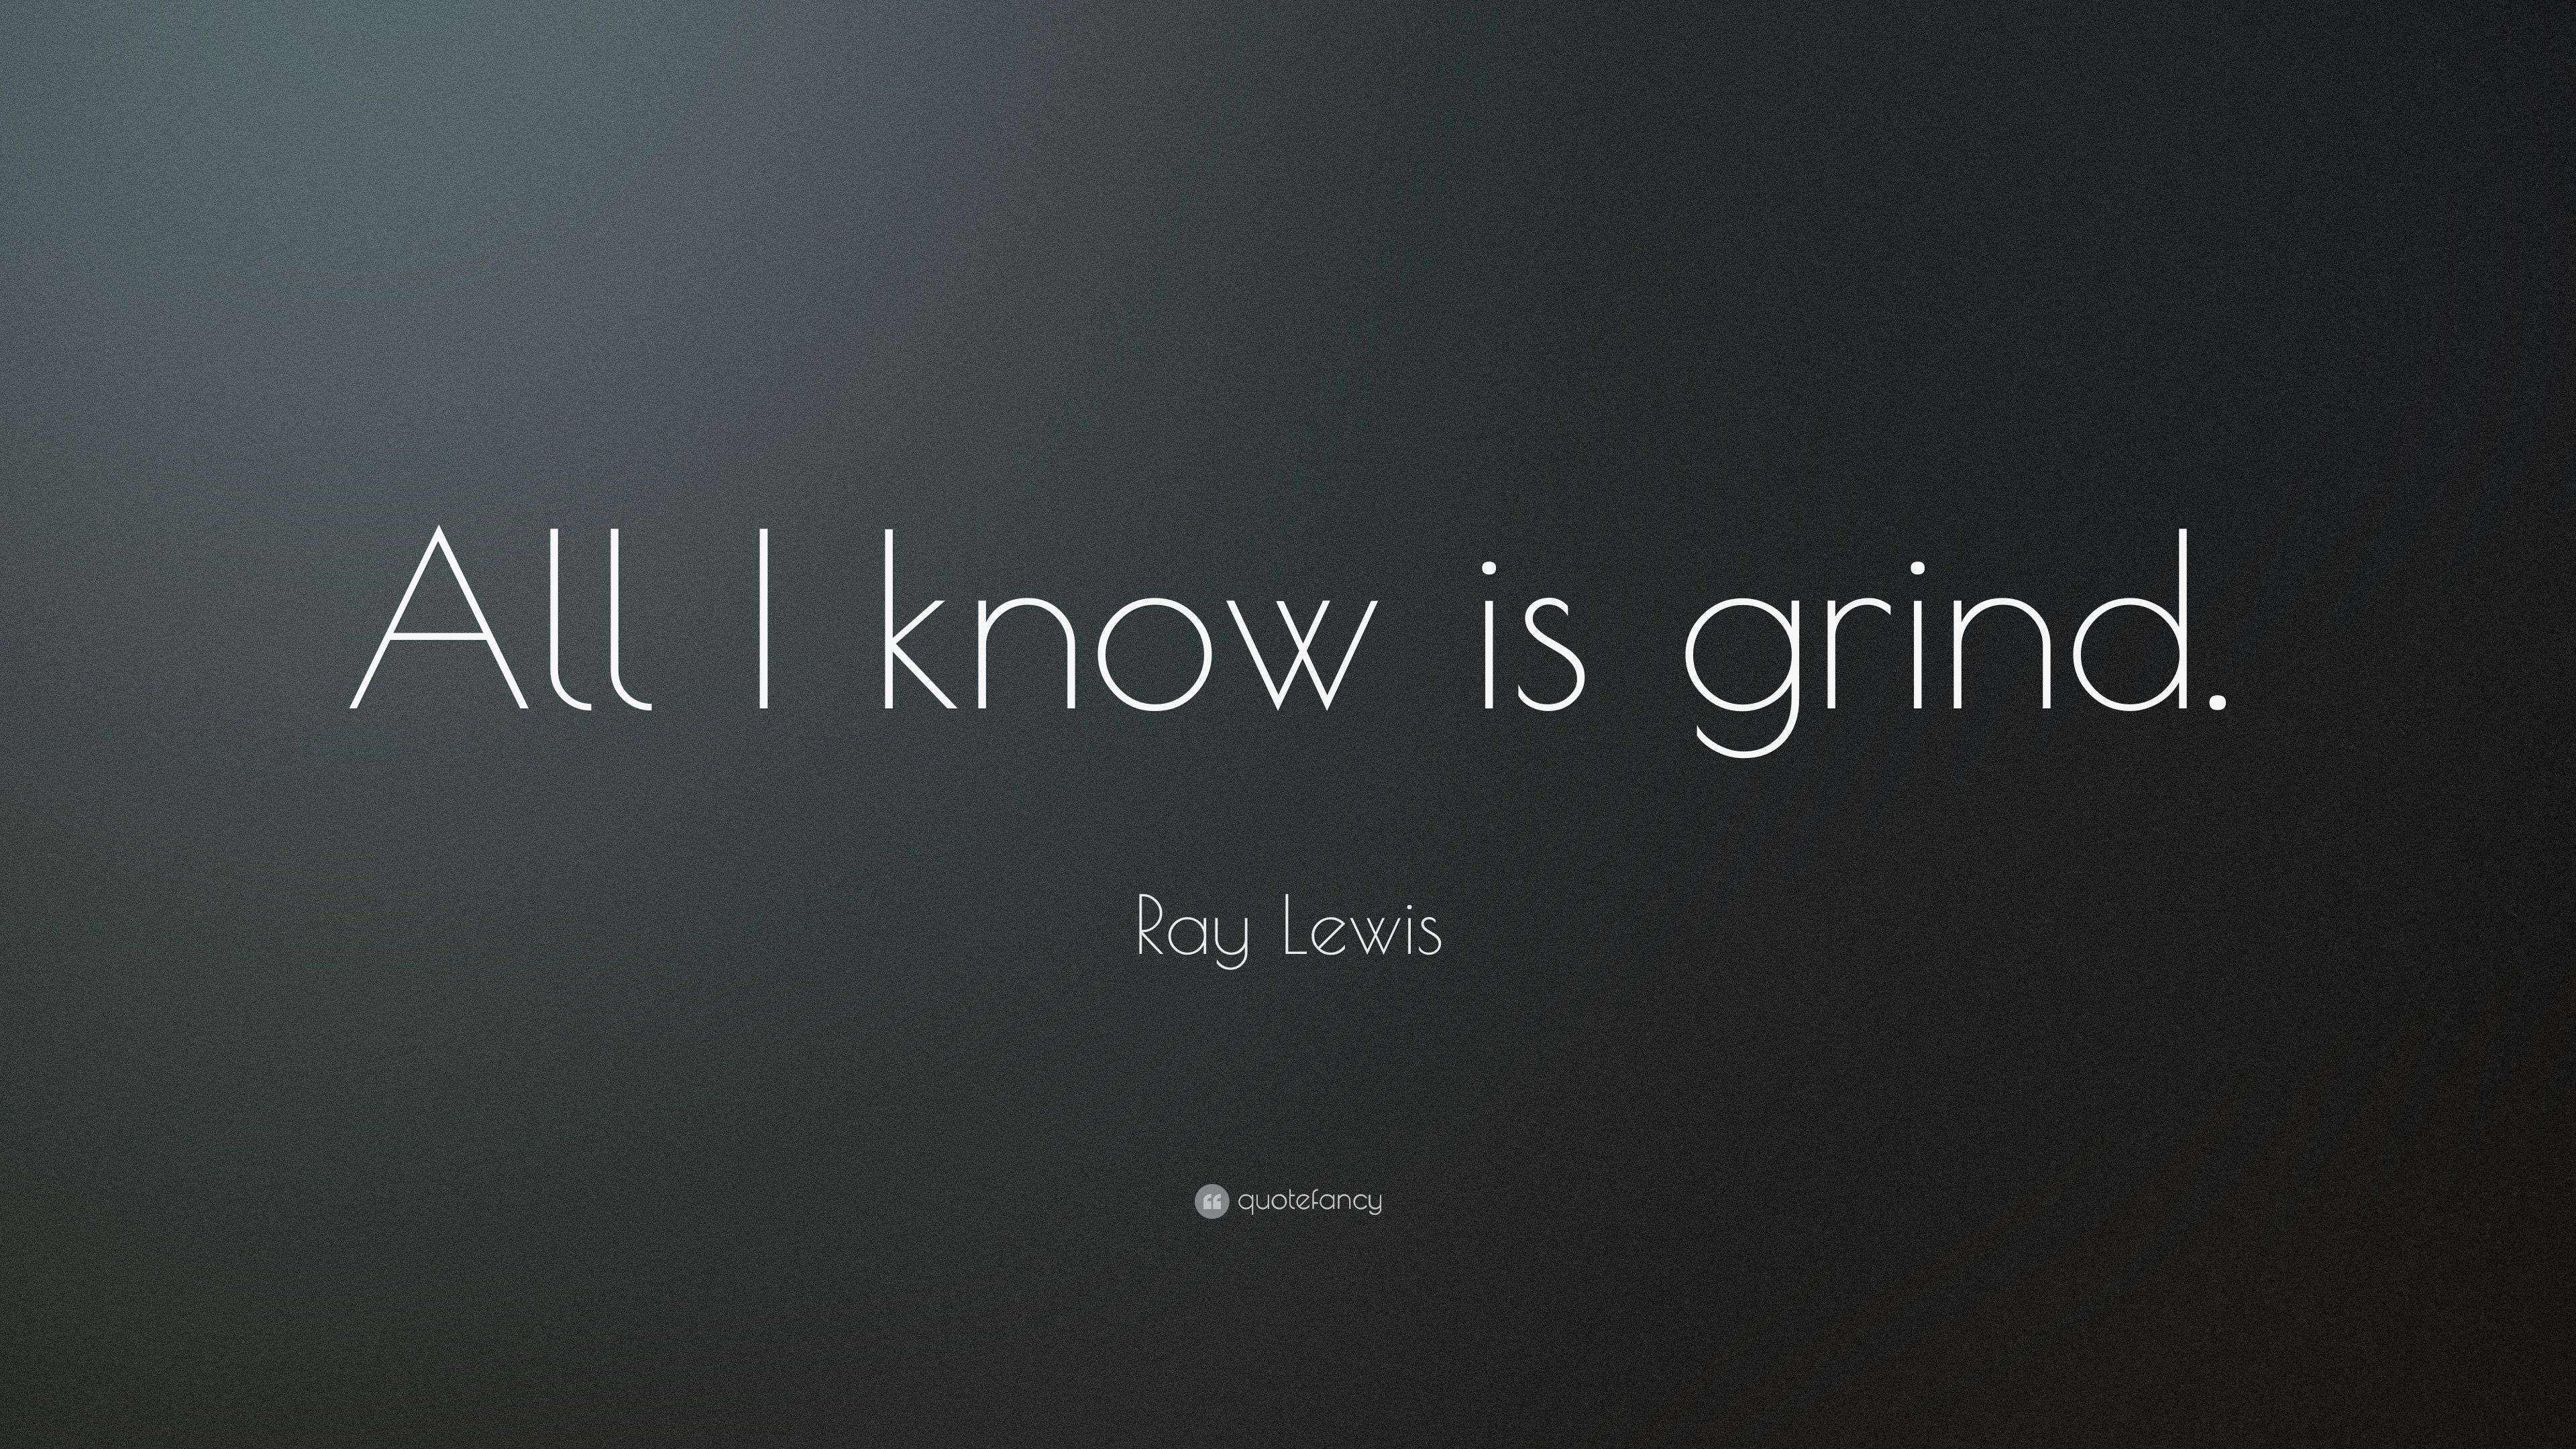 Ray Lewis Quote: “All I know is grind.” (14 wallpaper)